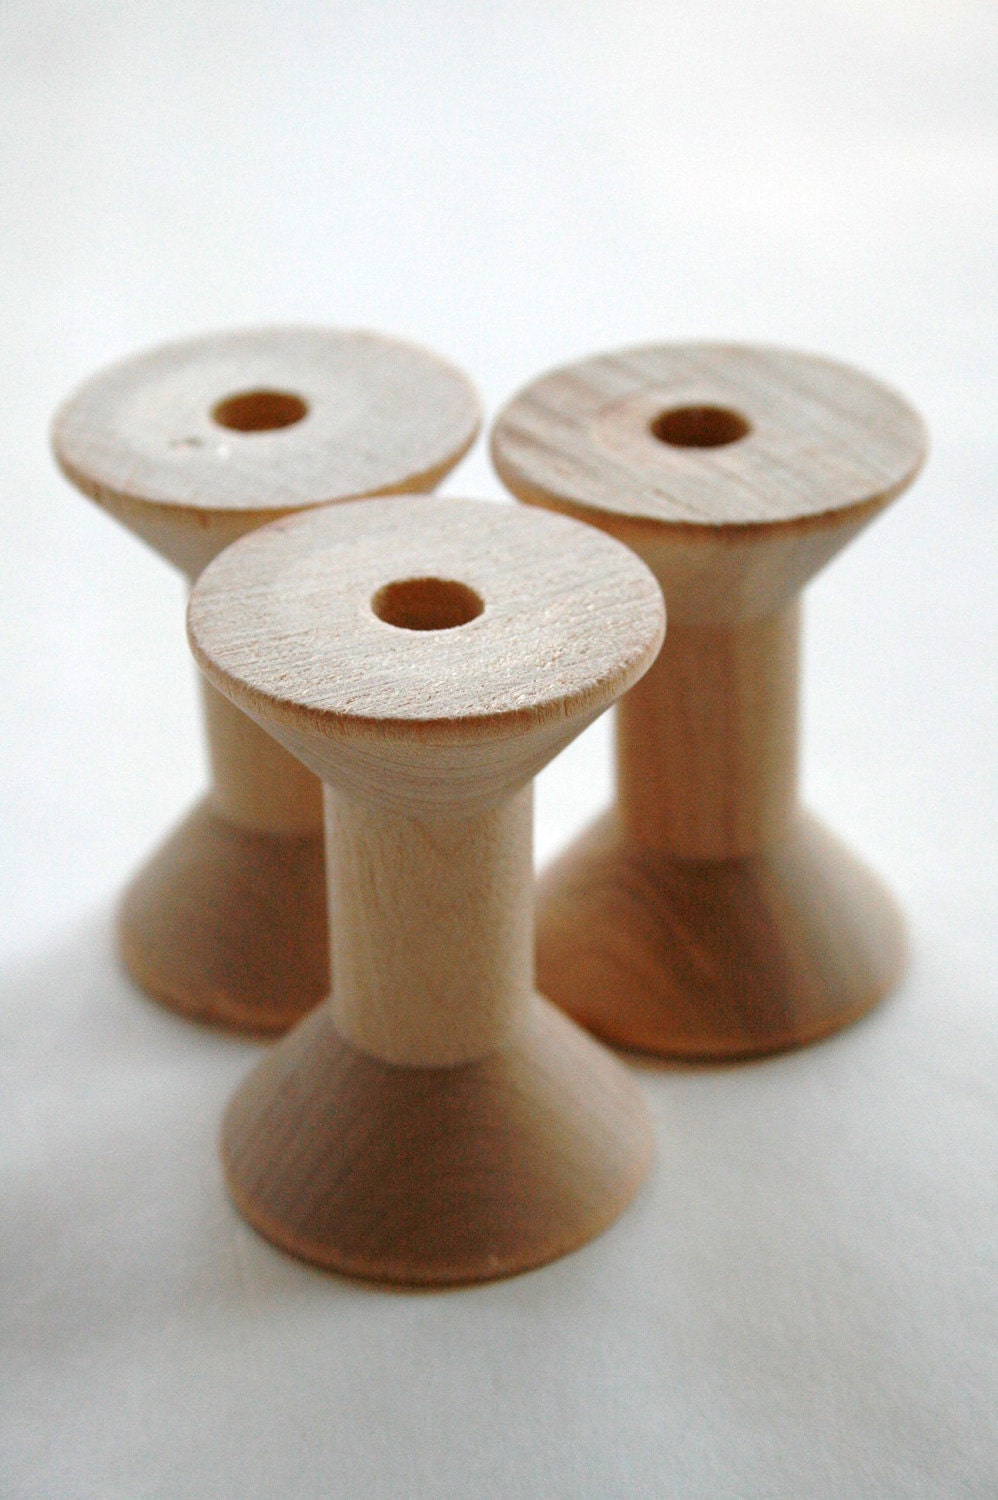 Vintage-Styled Stained Wood Spools – Ribbons and Spools